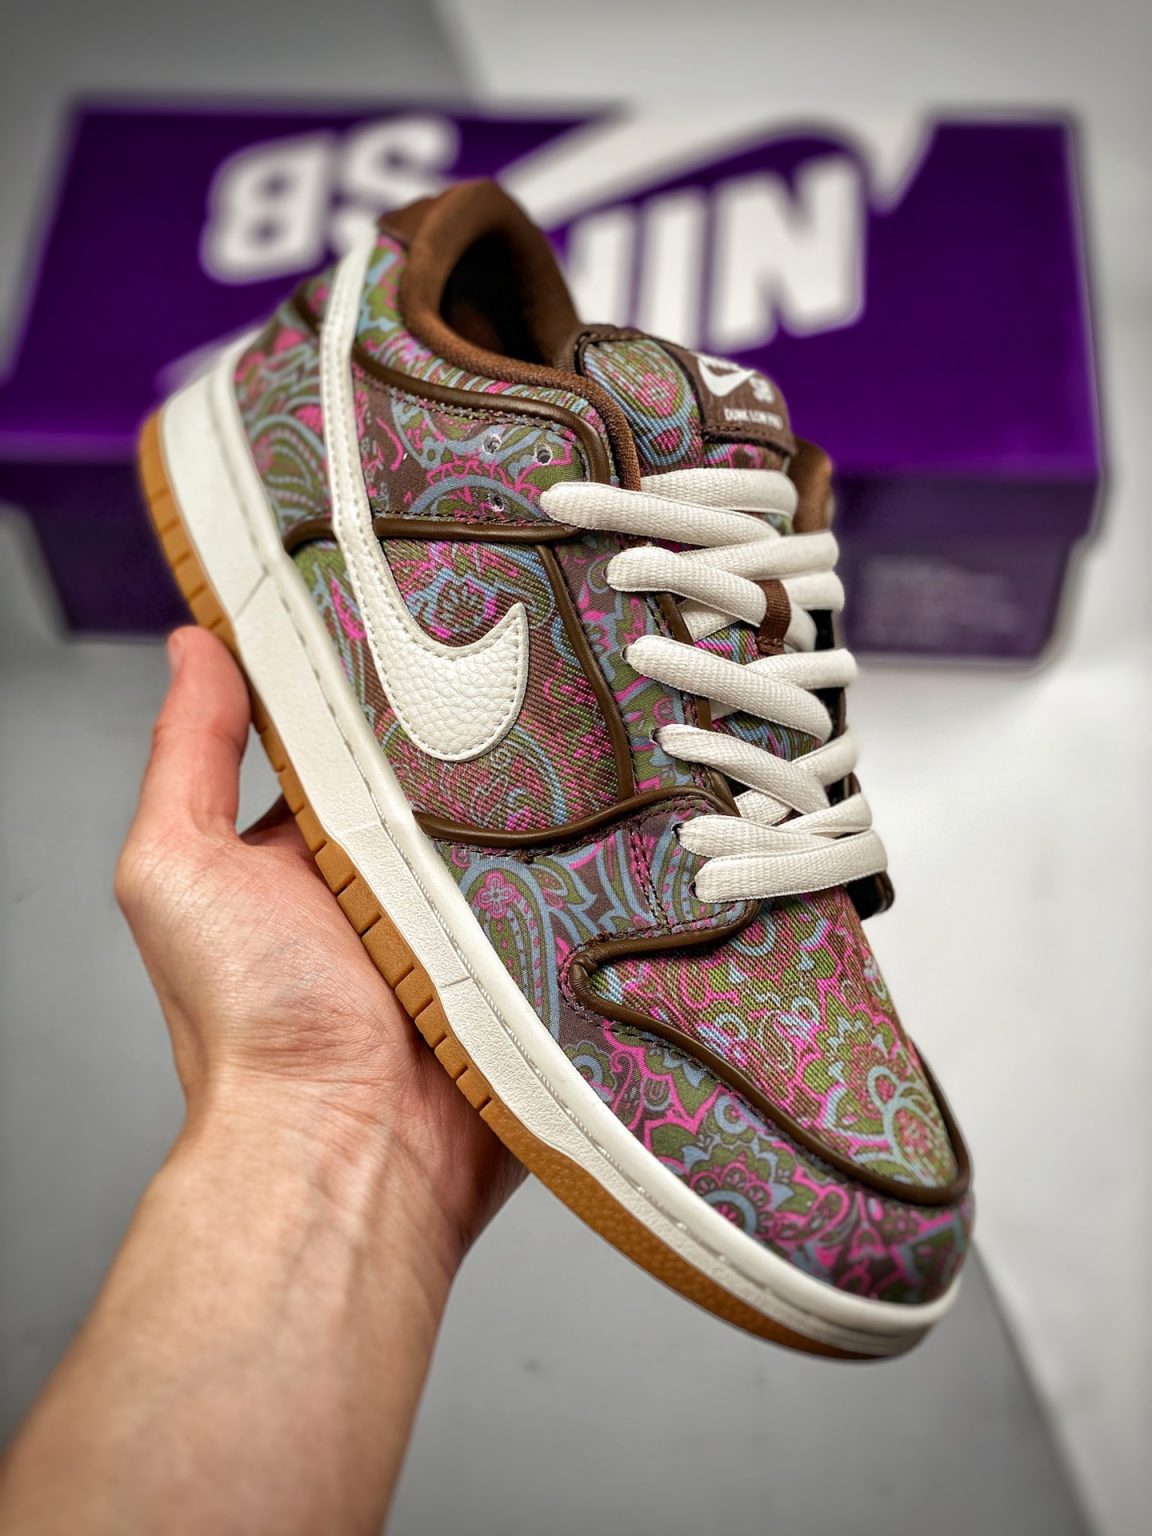 Nike SB Dunk Low “Paisley” Brown/Burgundy-Green-Pink DH7534-200 For ...